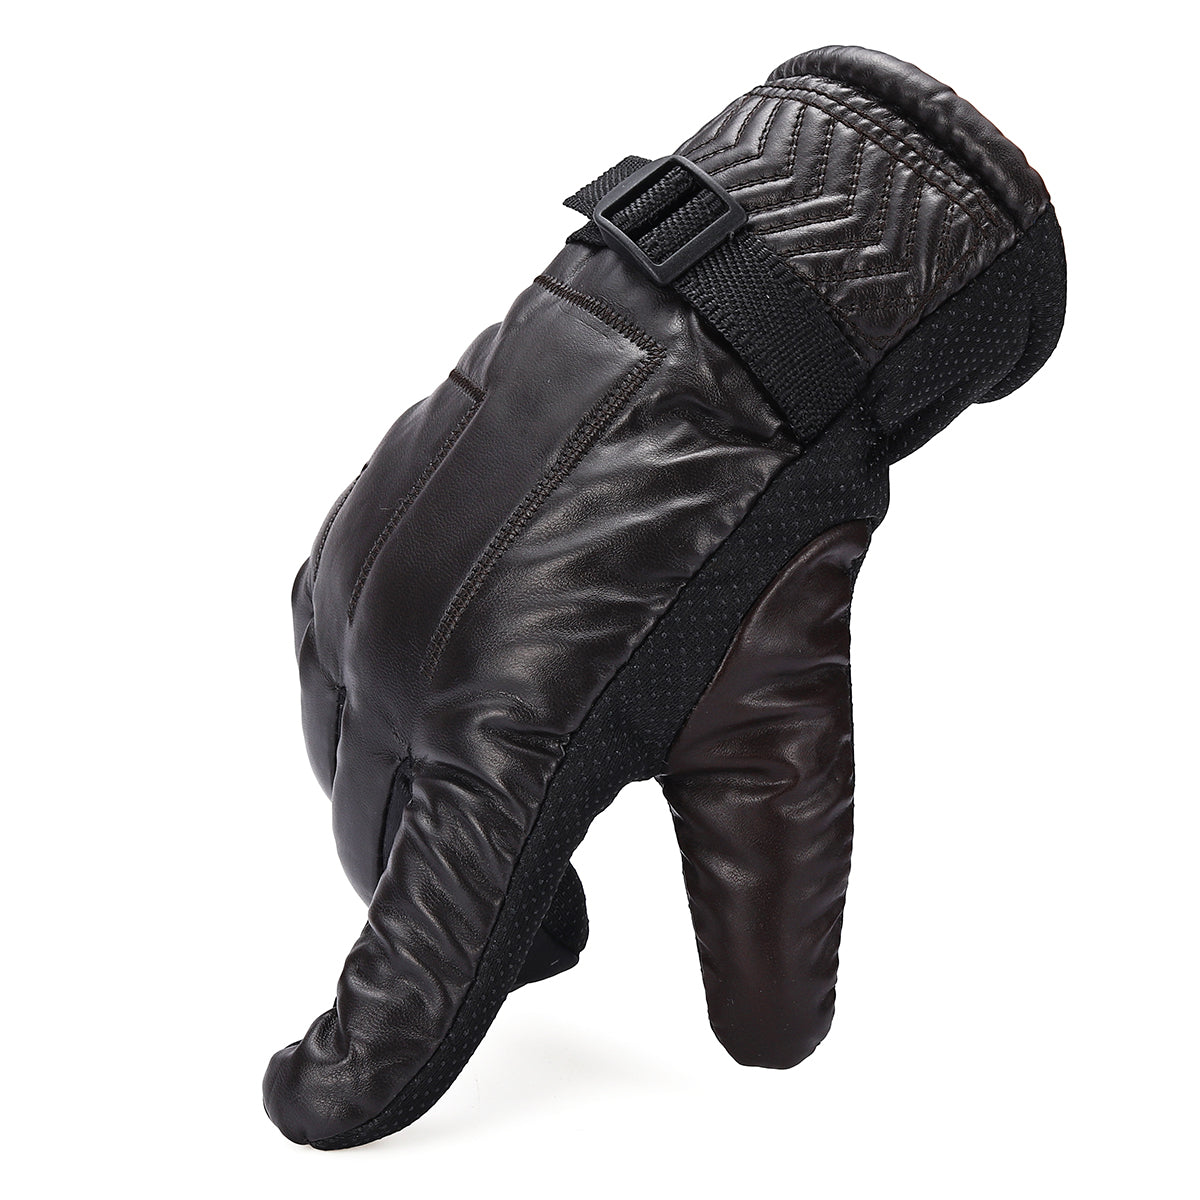 Dark Slate Gray Warm Gloves Mittens Simulation Leather Full Fluff Windproof Motorcycle Cold Protection